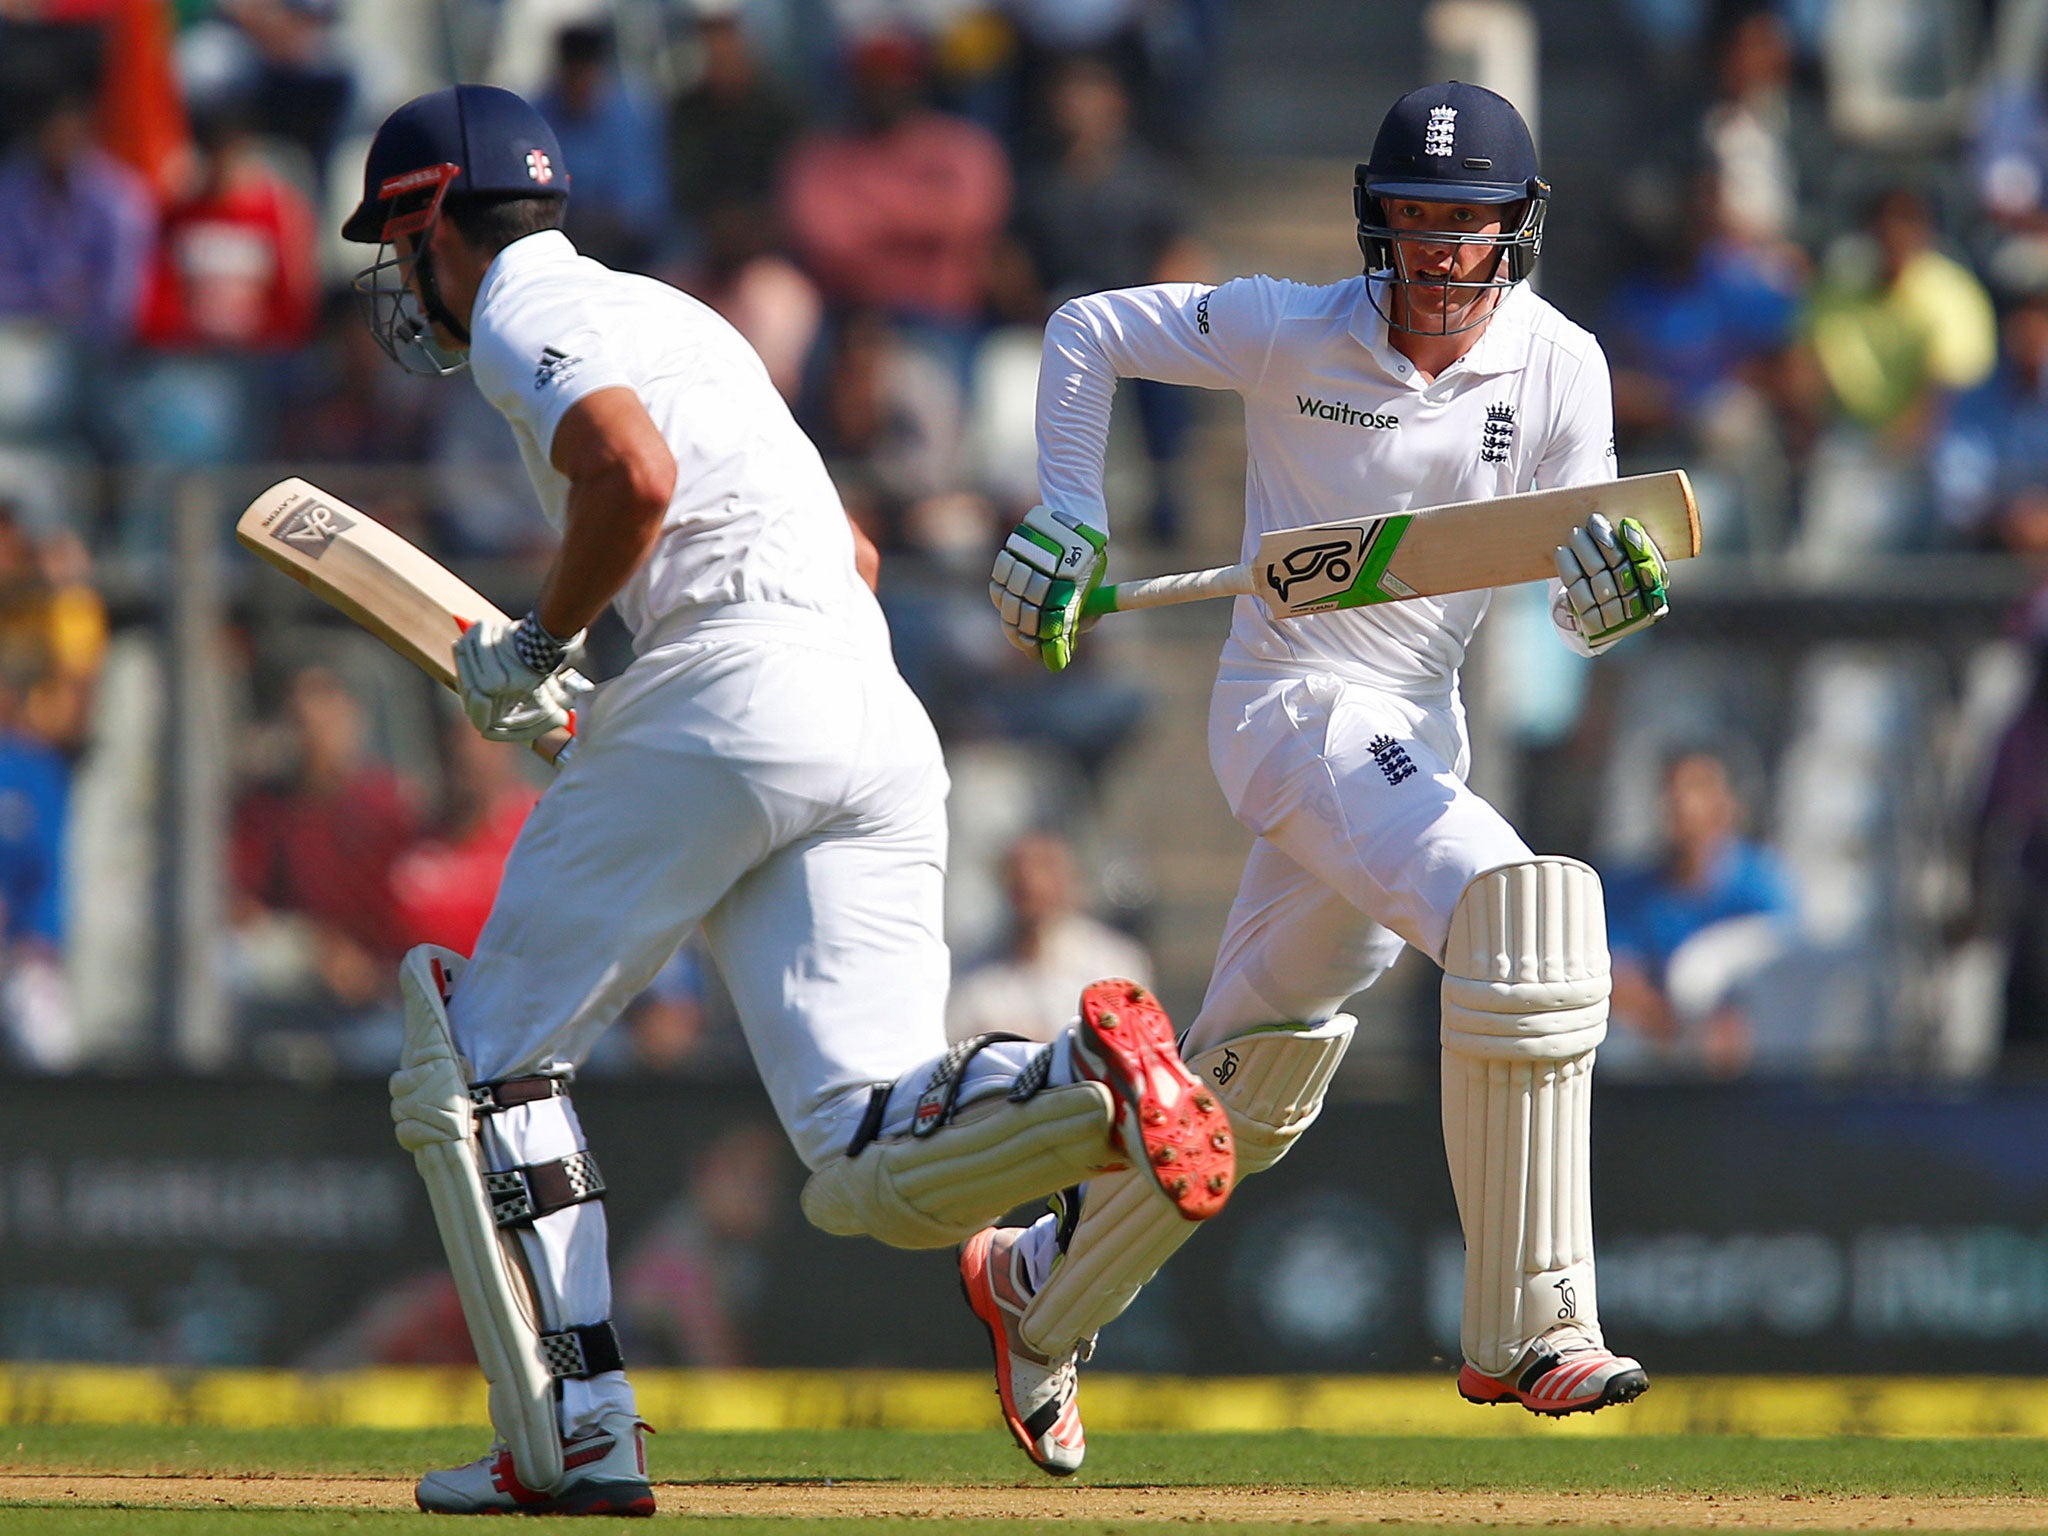 Jennings (R) and Alastair Cook run between wickets